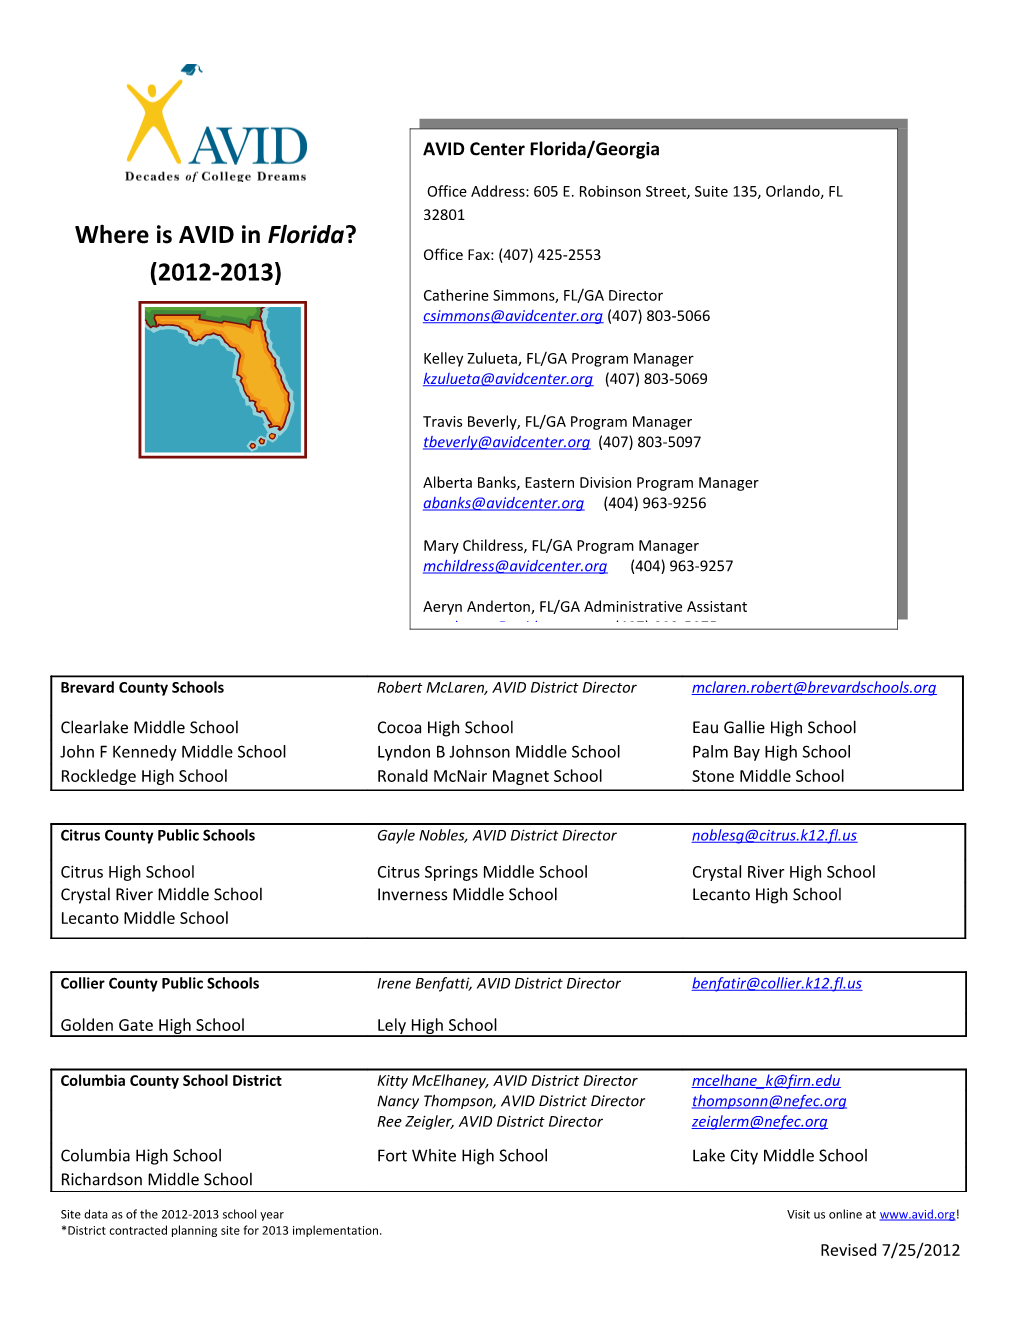 Site Data As of the 2012-2013 School Year Visit Us Online At